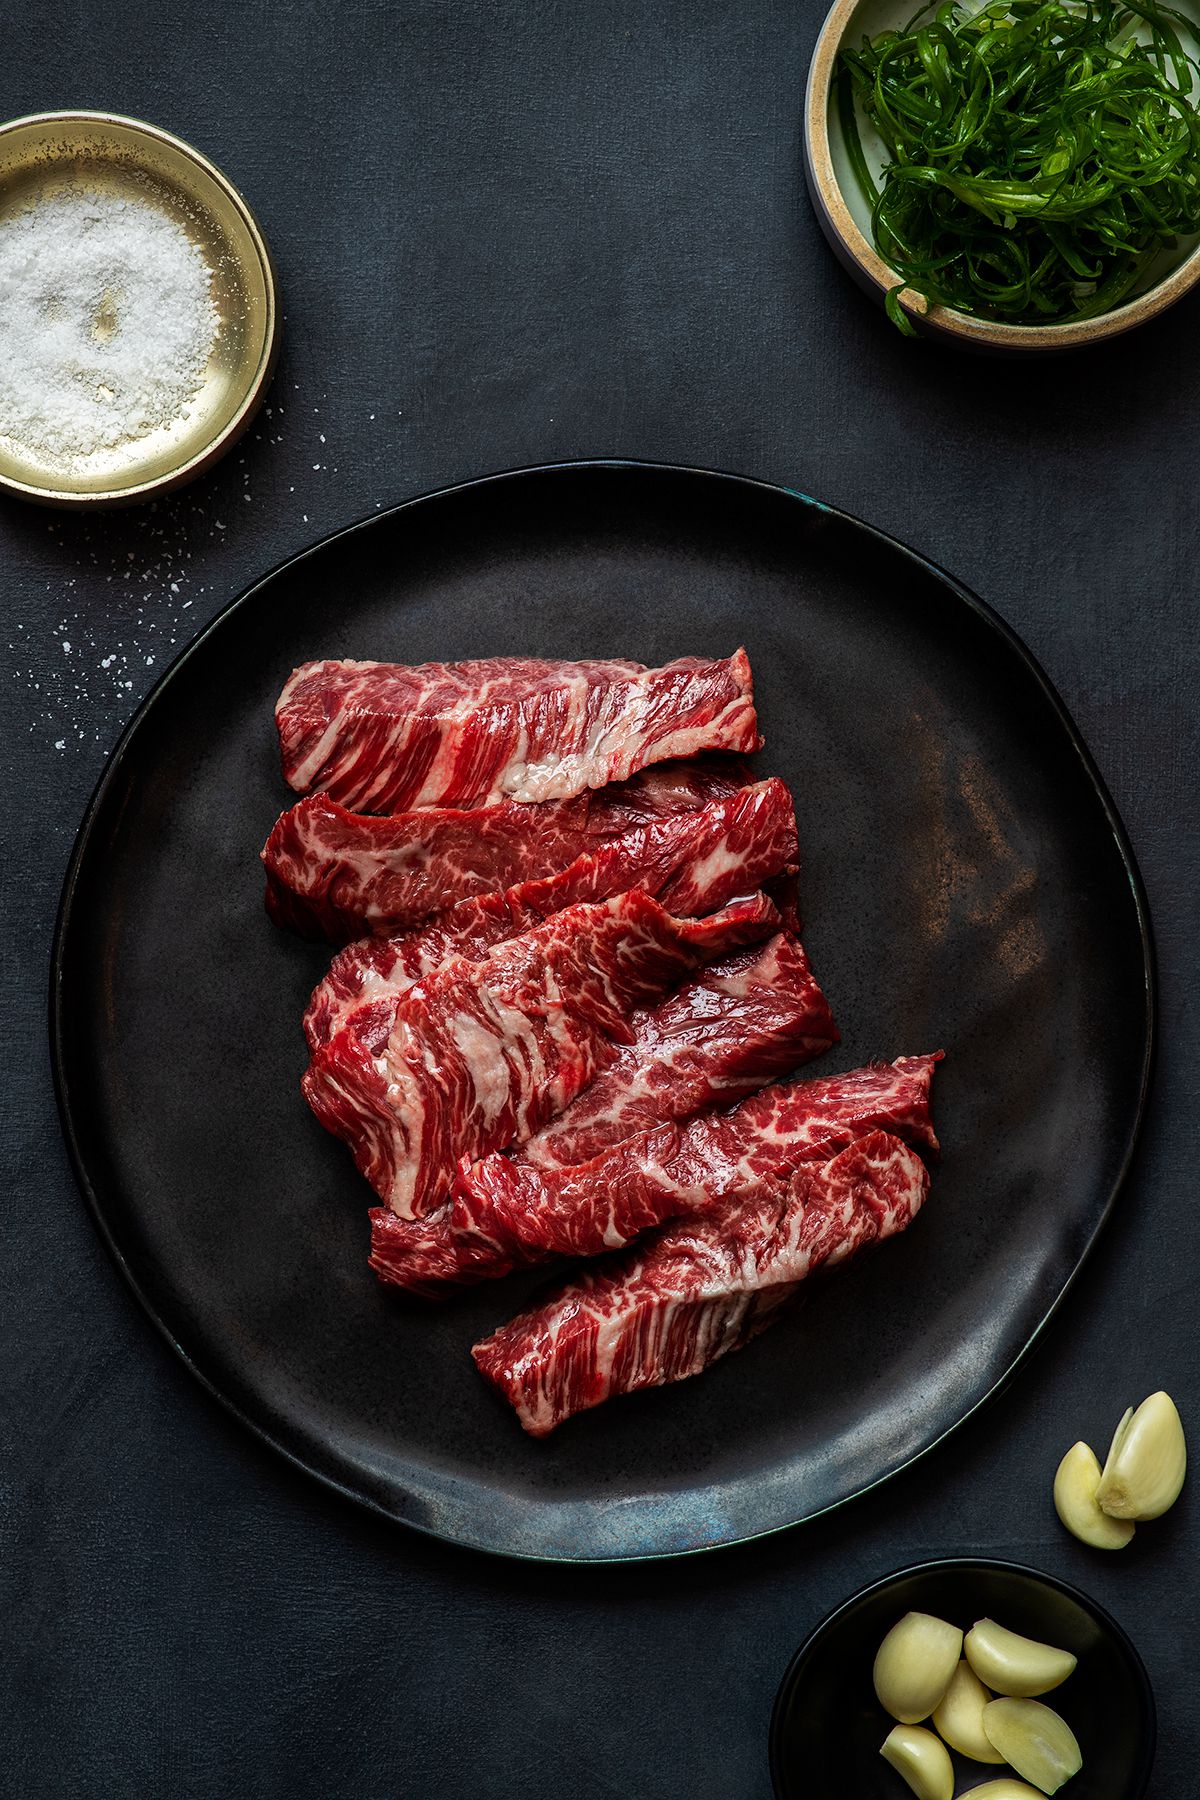 Several strips of highly marbled skirt steak on a black plate.